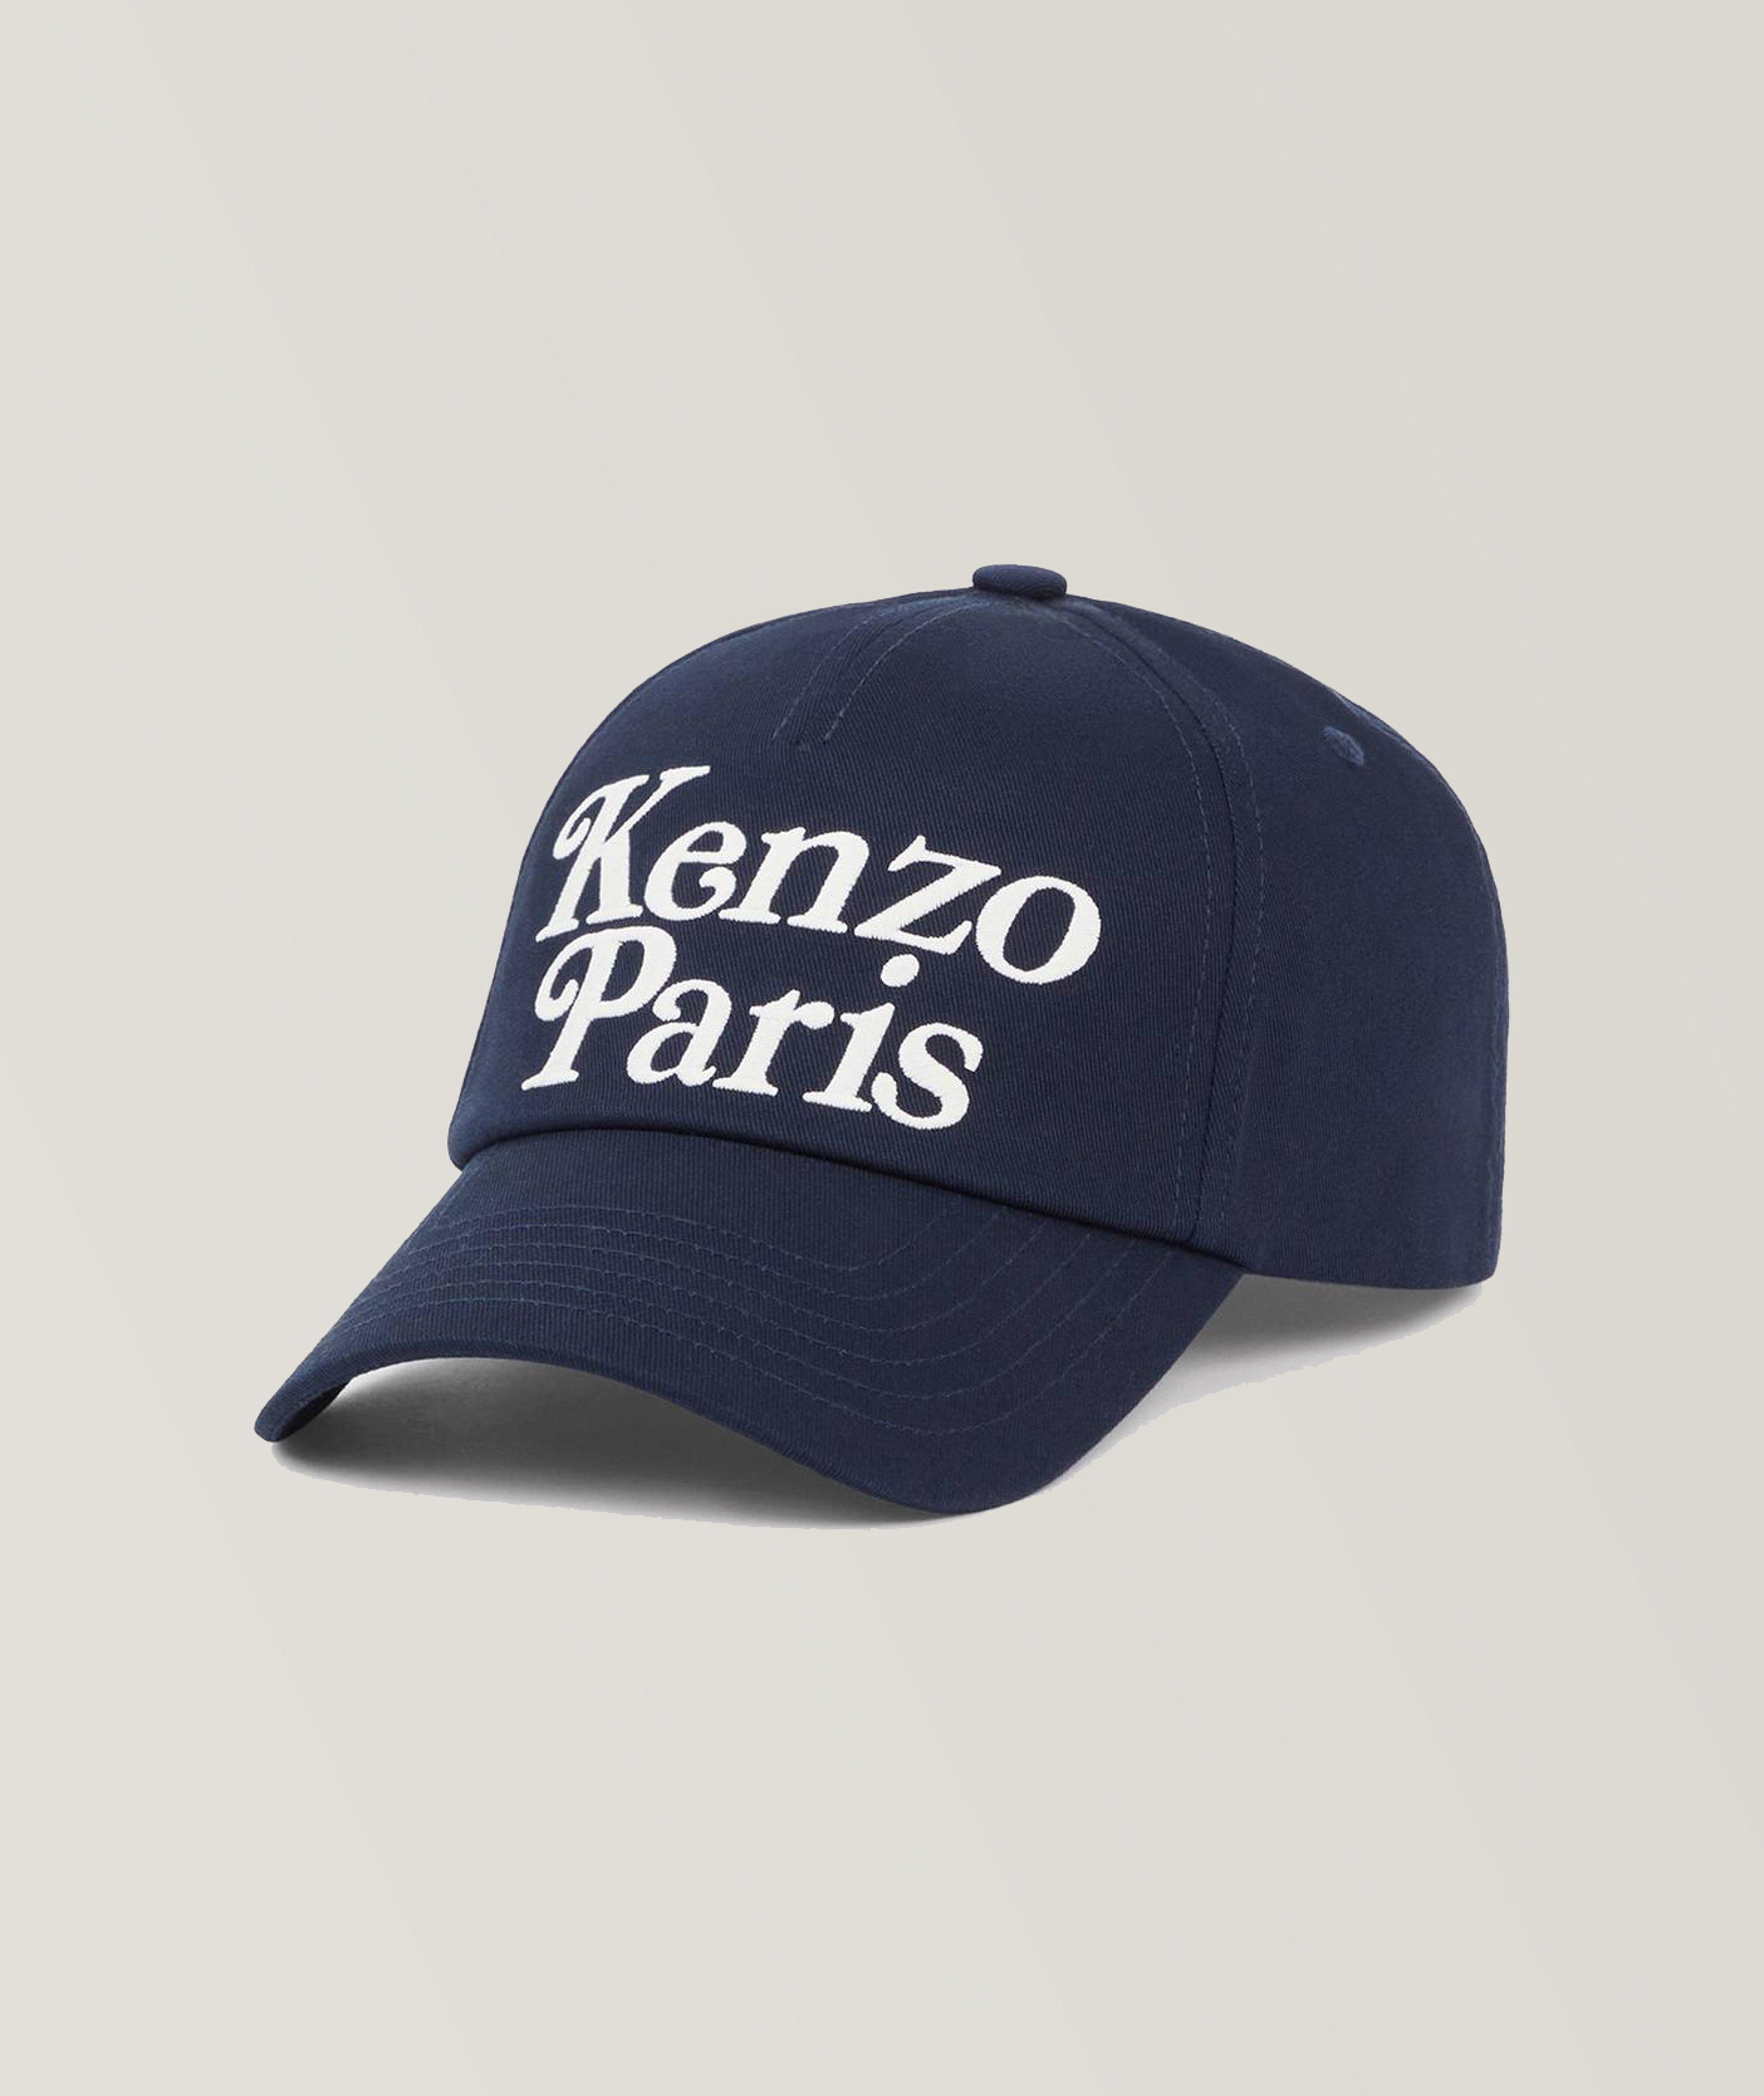 BOSS - Cotton-twill cap with embroidered logo and adjustable strap